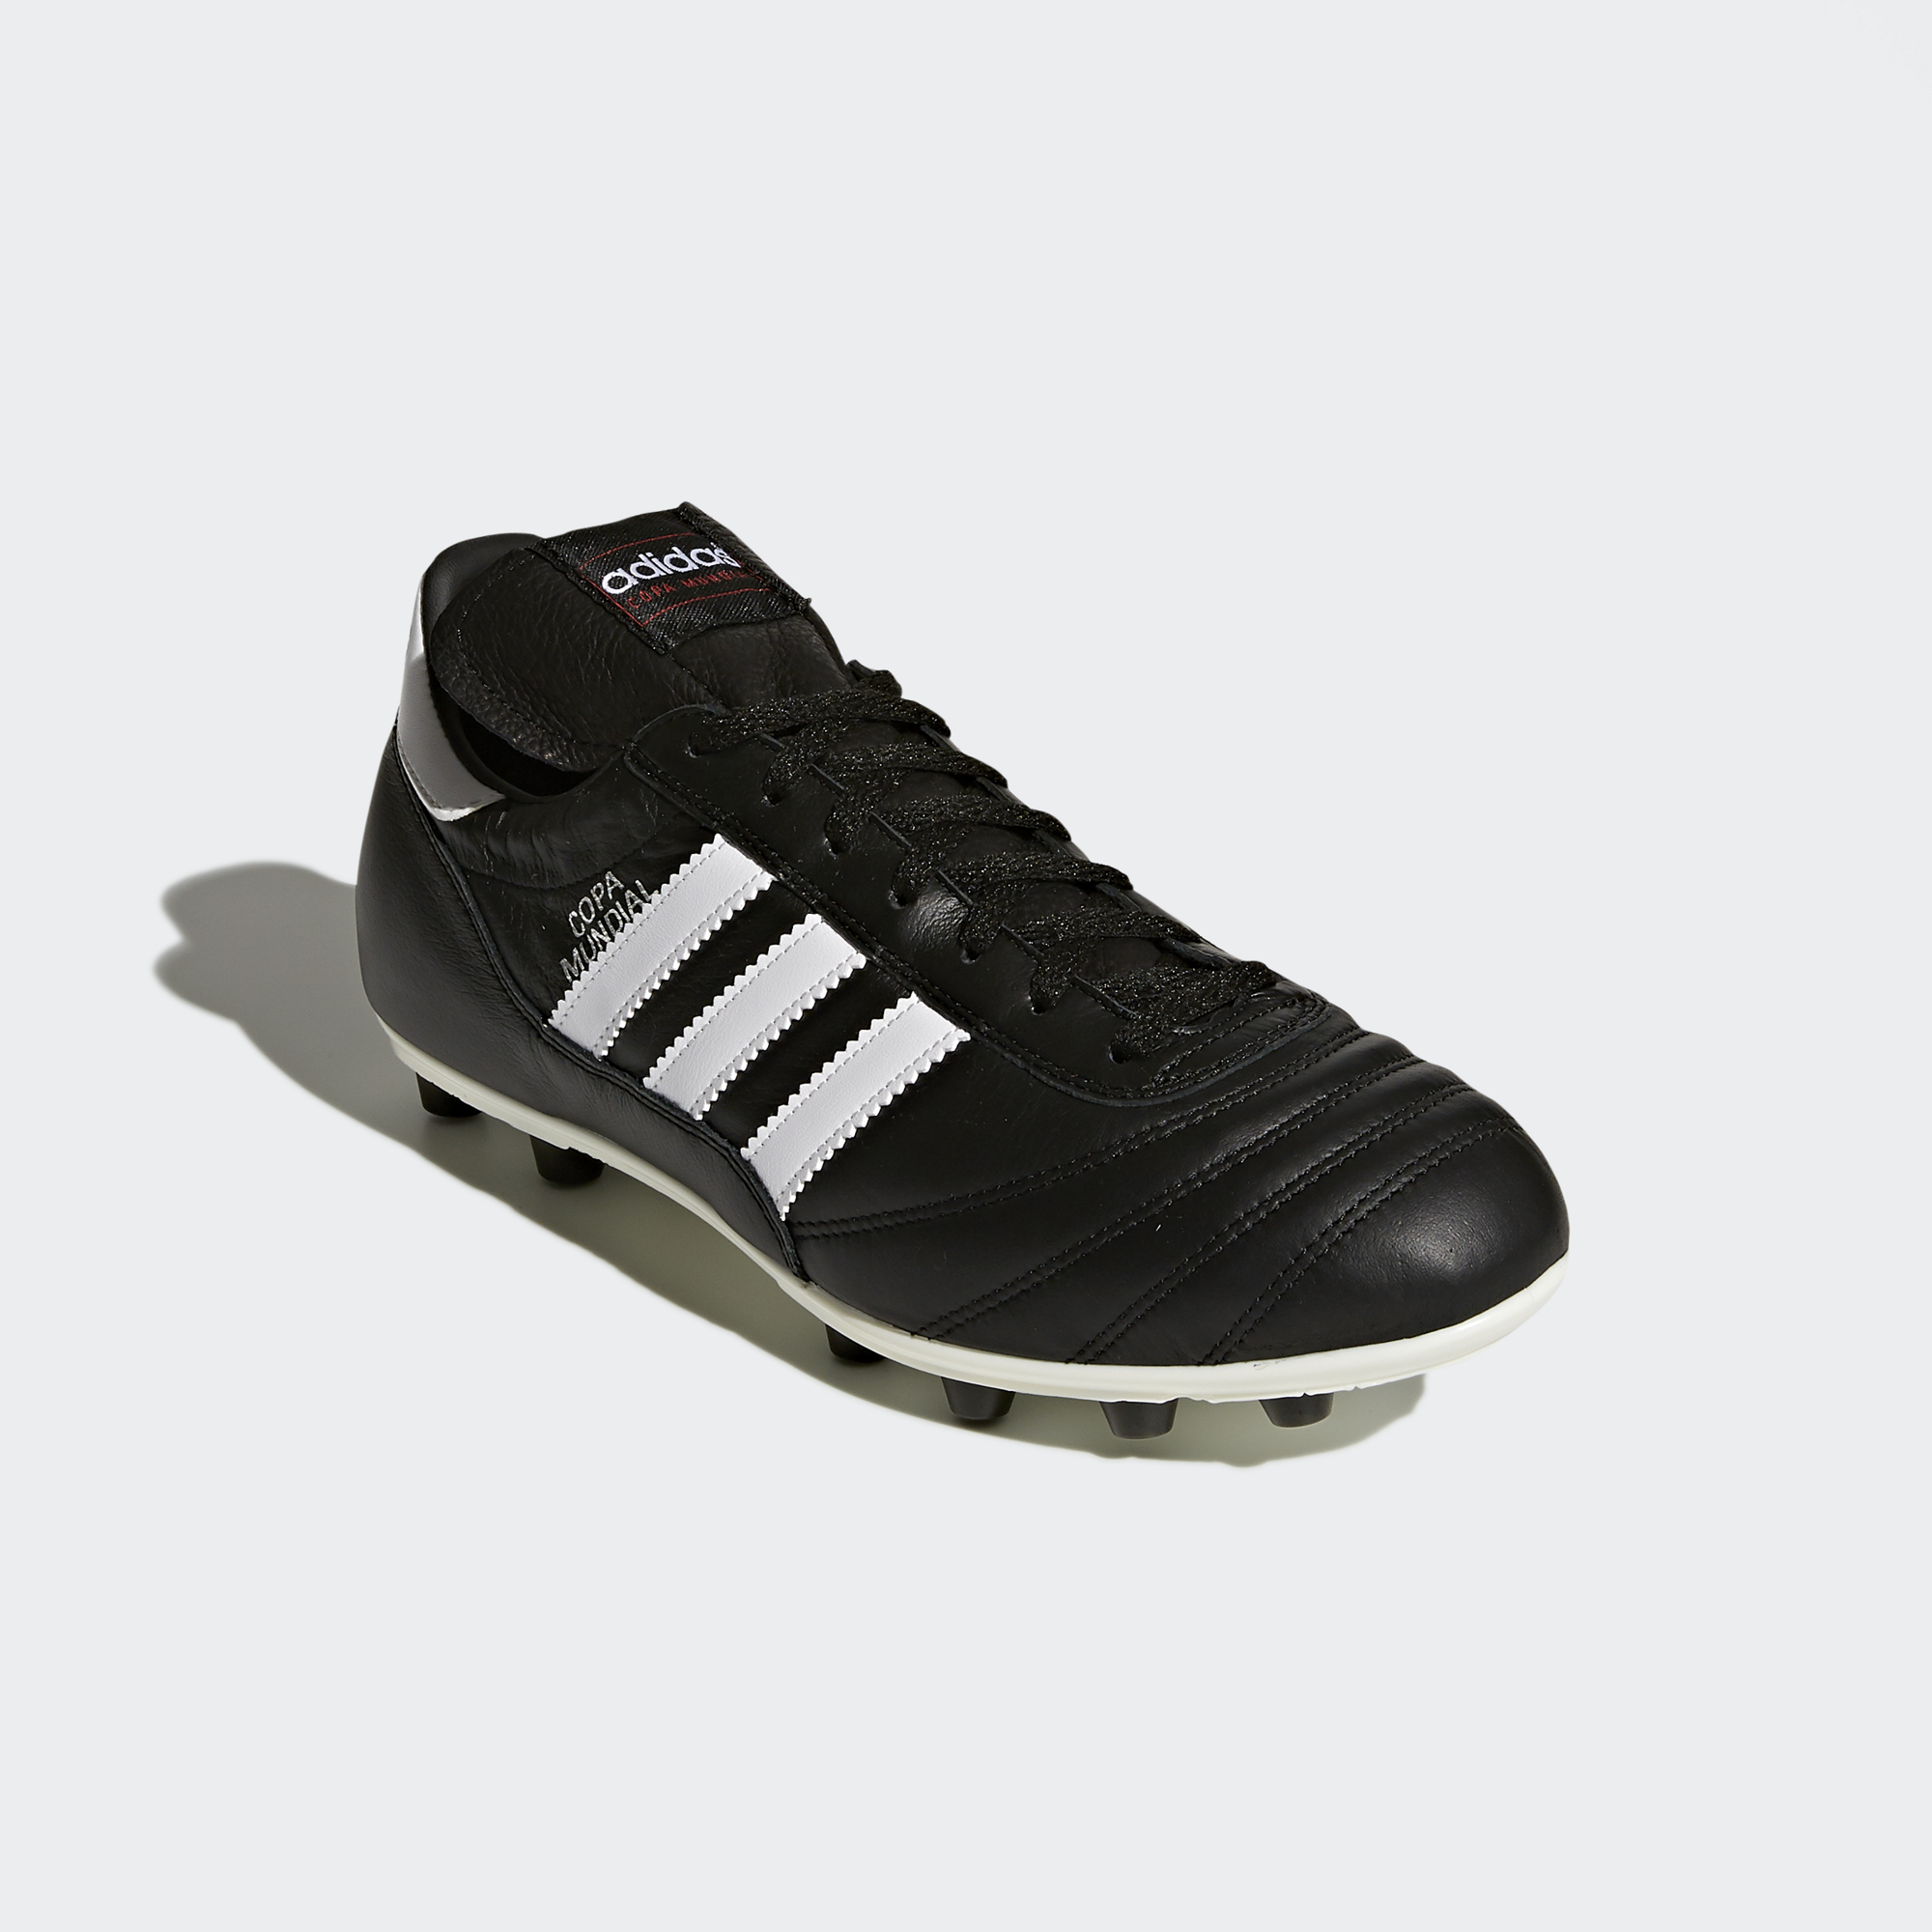 preferable Frustrating not to mention stefanssoccer.com:adidas Copa Mundial FG - Black / White / Gold